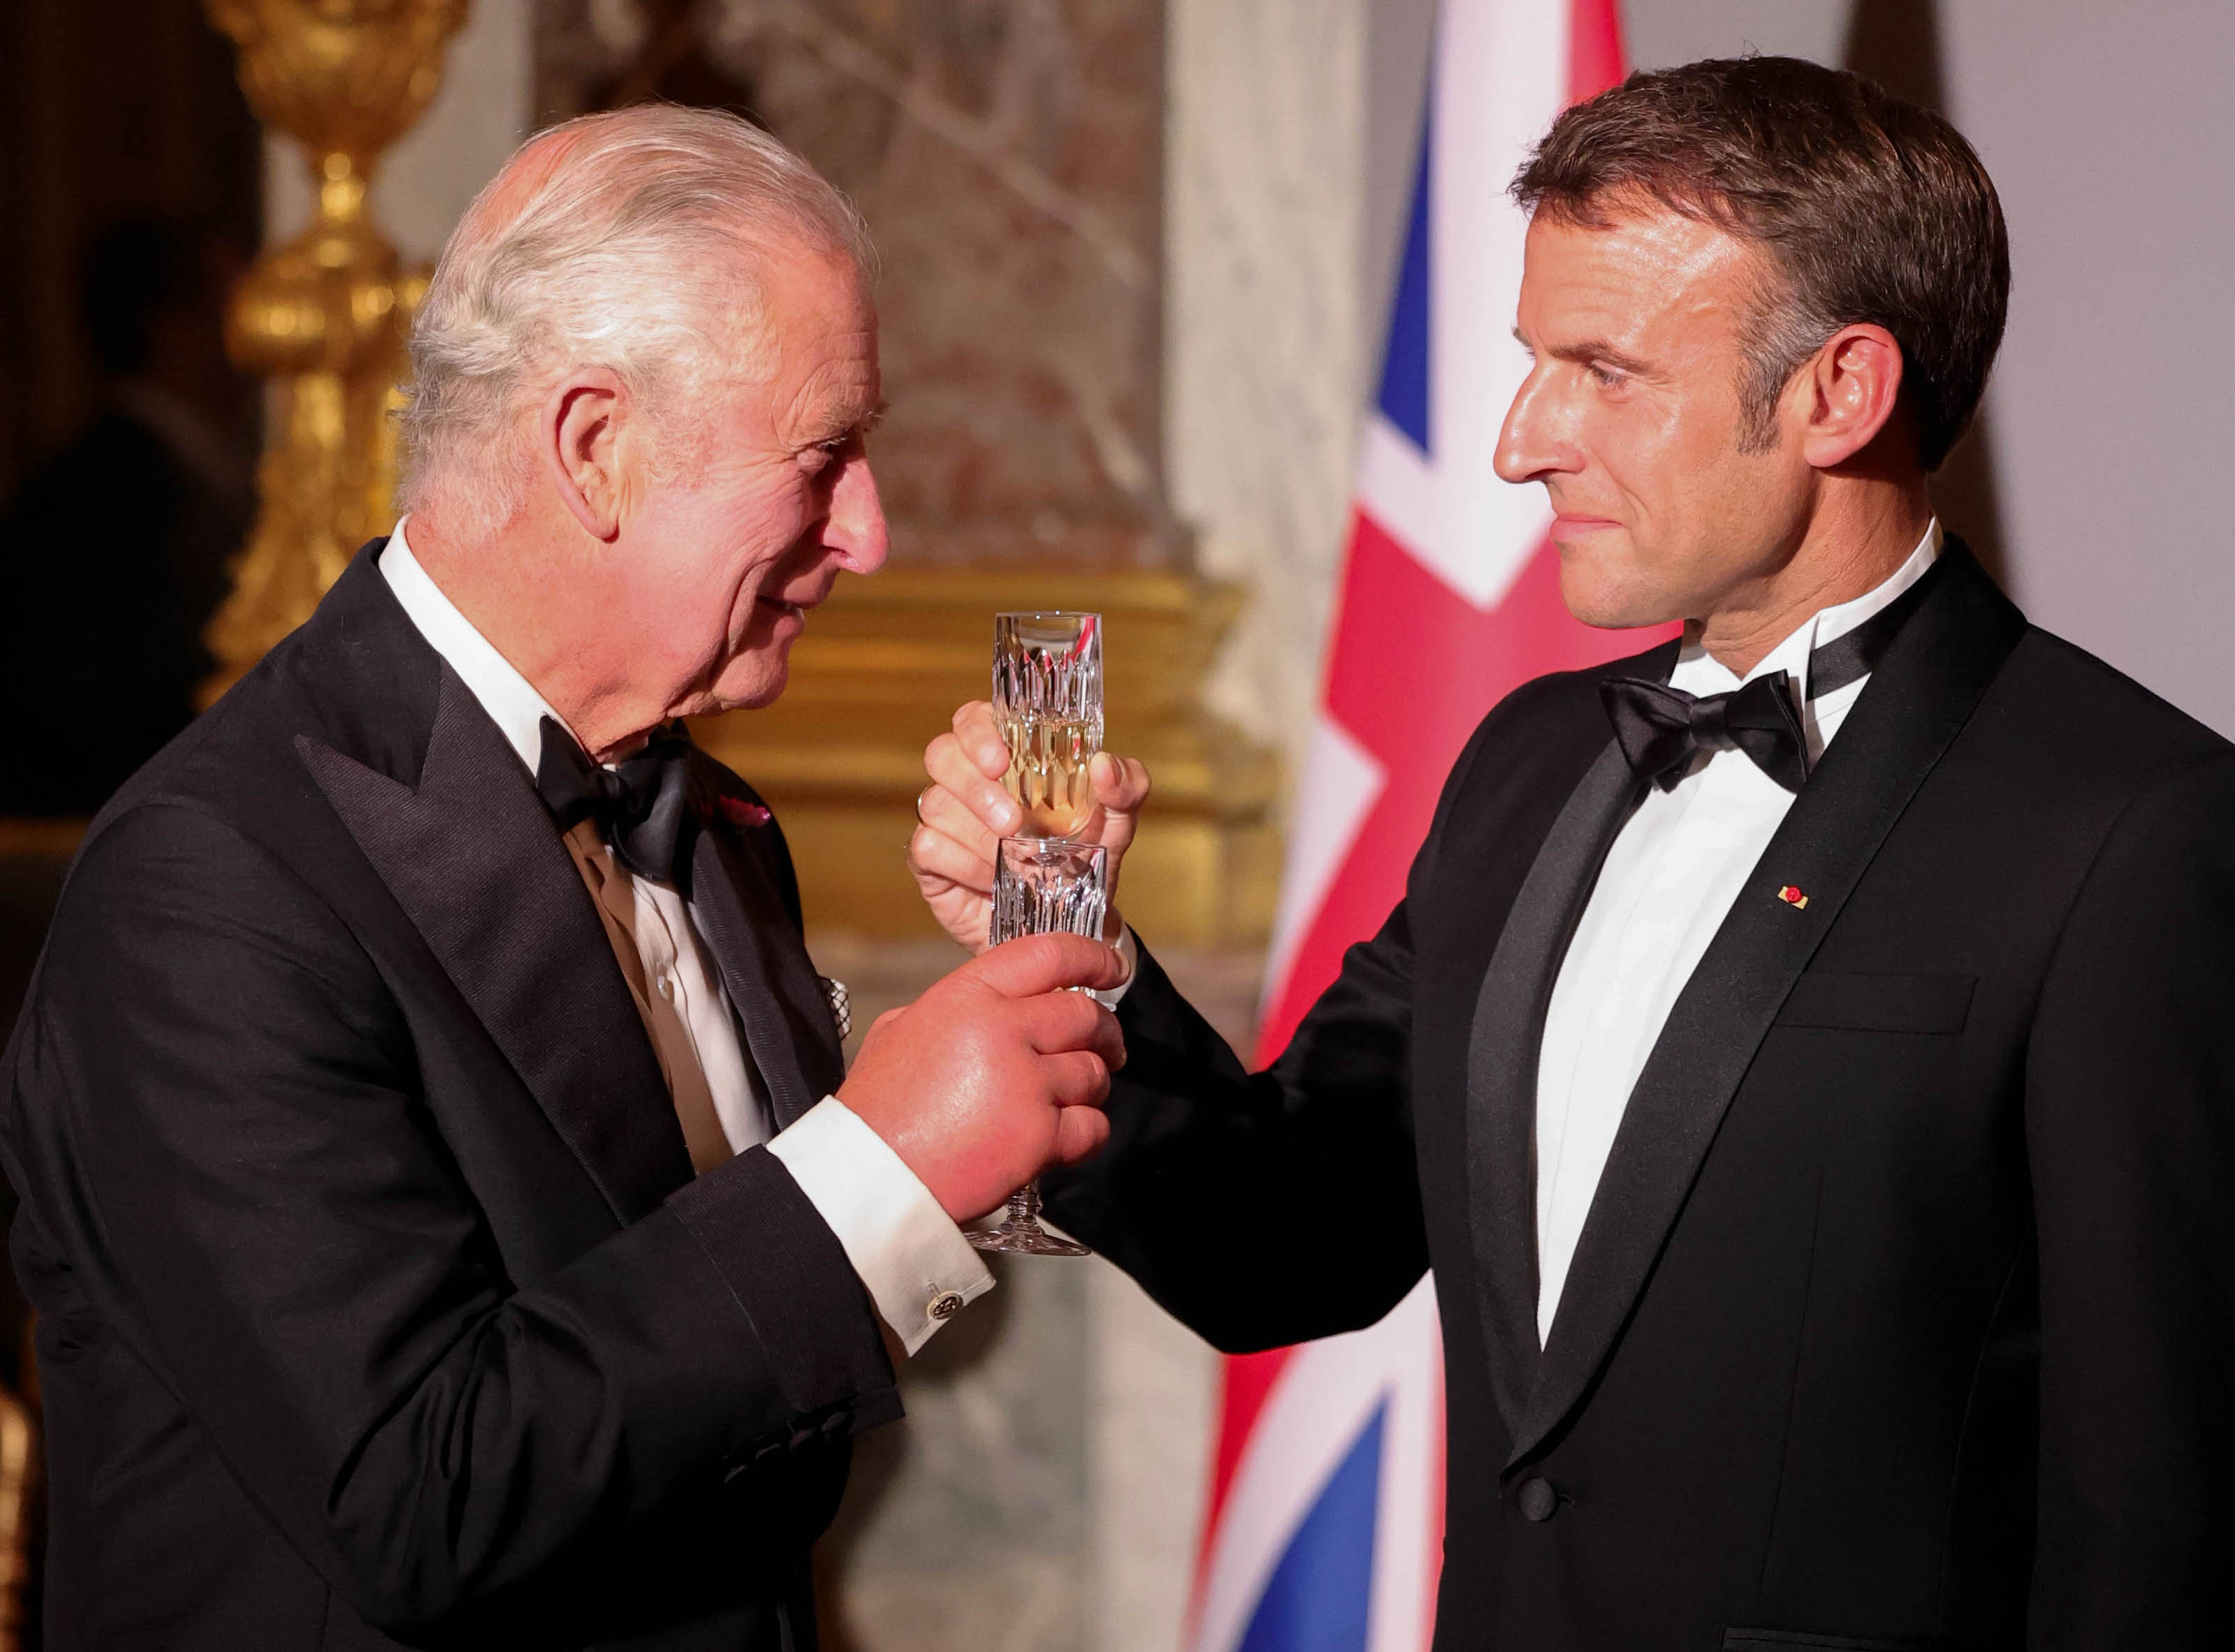 <p>King Charles III and France's President Emmanuel Macron shared a toast celebrating the U.K.-France relationship during a state banquet inside the Hall of Mirrors at the Palace of Versailles outside Paris on Sept. 20, 2023, the first night of <a href="https://www.wonderwall.com/entertainment/king-charles-iii-and-queen-camilla-in-france-see-the-best-photos-from-the-royals-official-state-visit-791038.gallery">the monarch's three-day visit to France.</a></p>